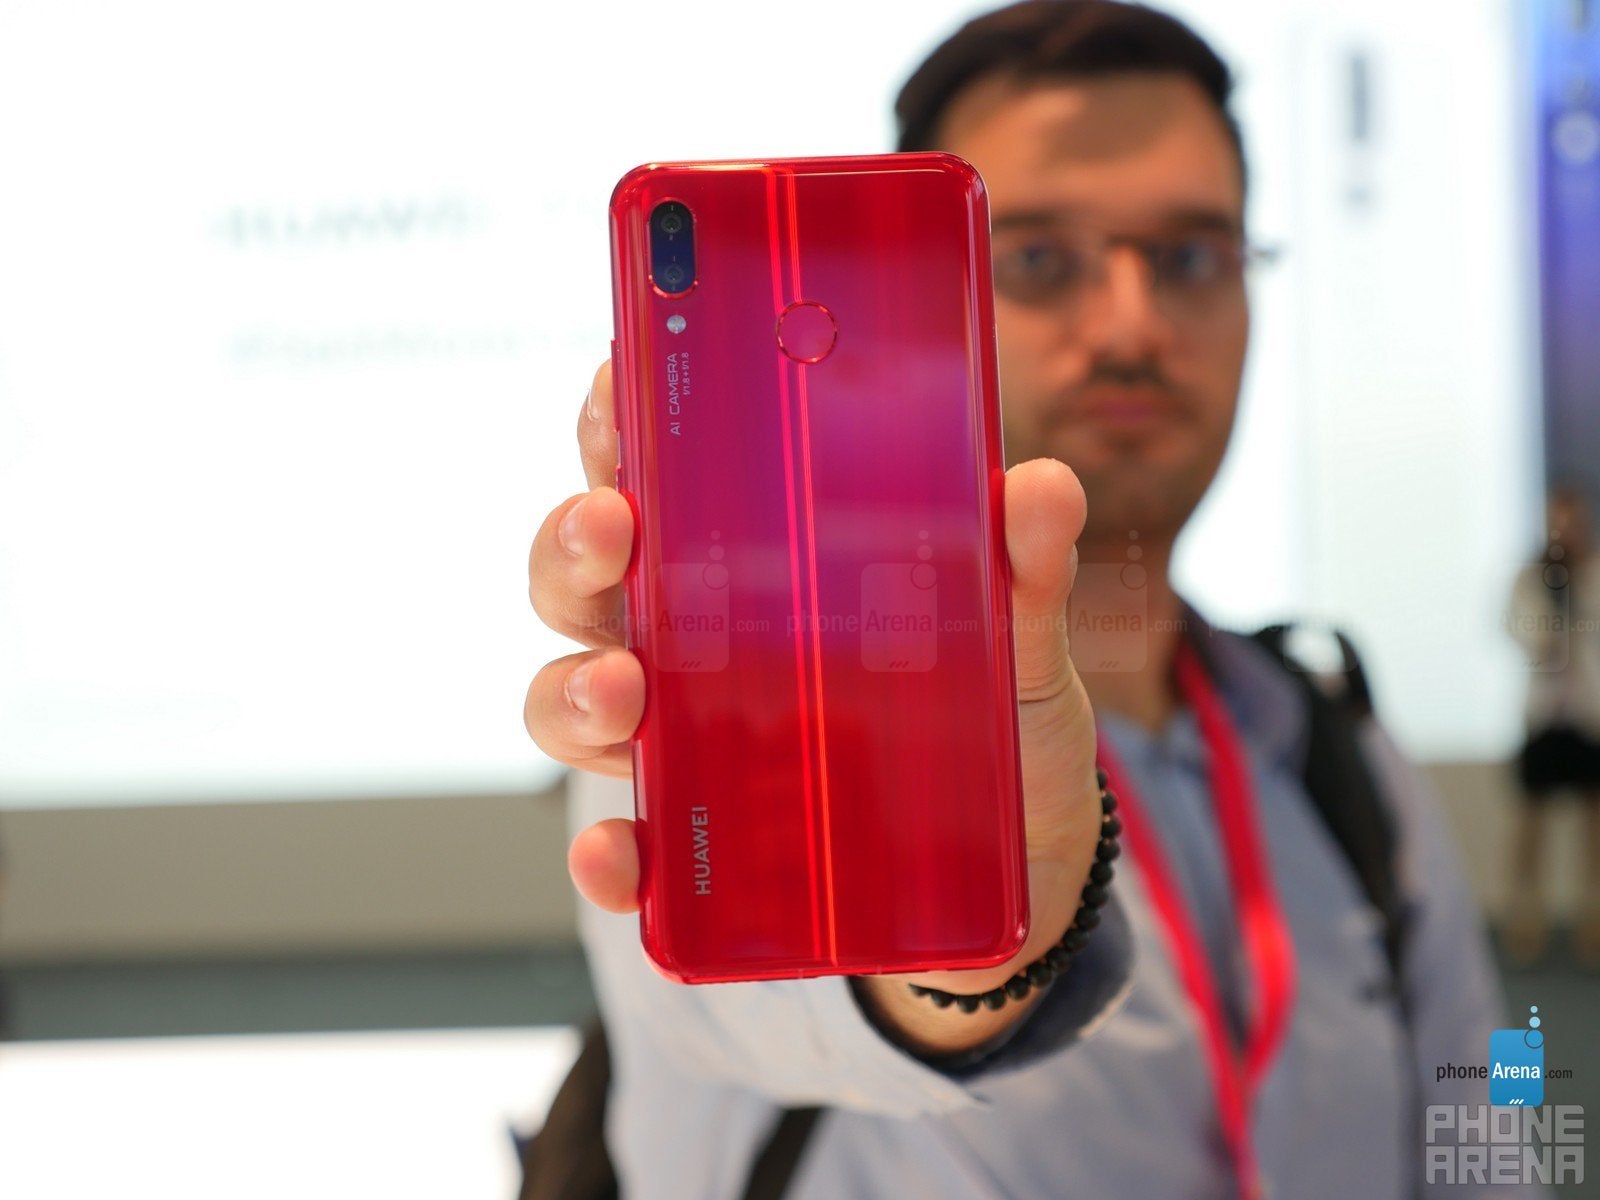 Huawei Nova 3 hands-on: Vibrant colors and great value extravaganza